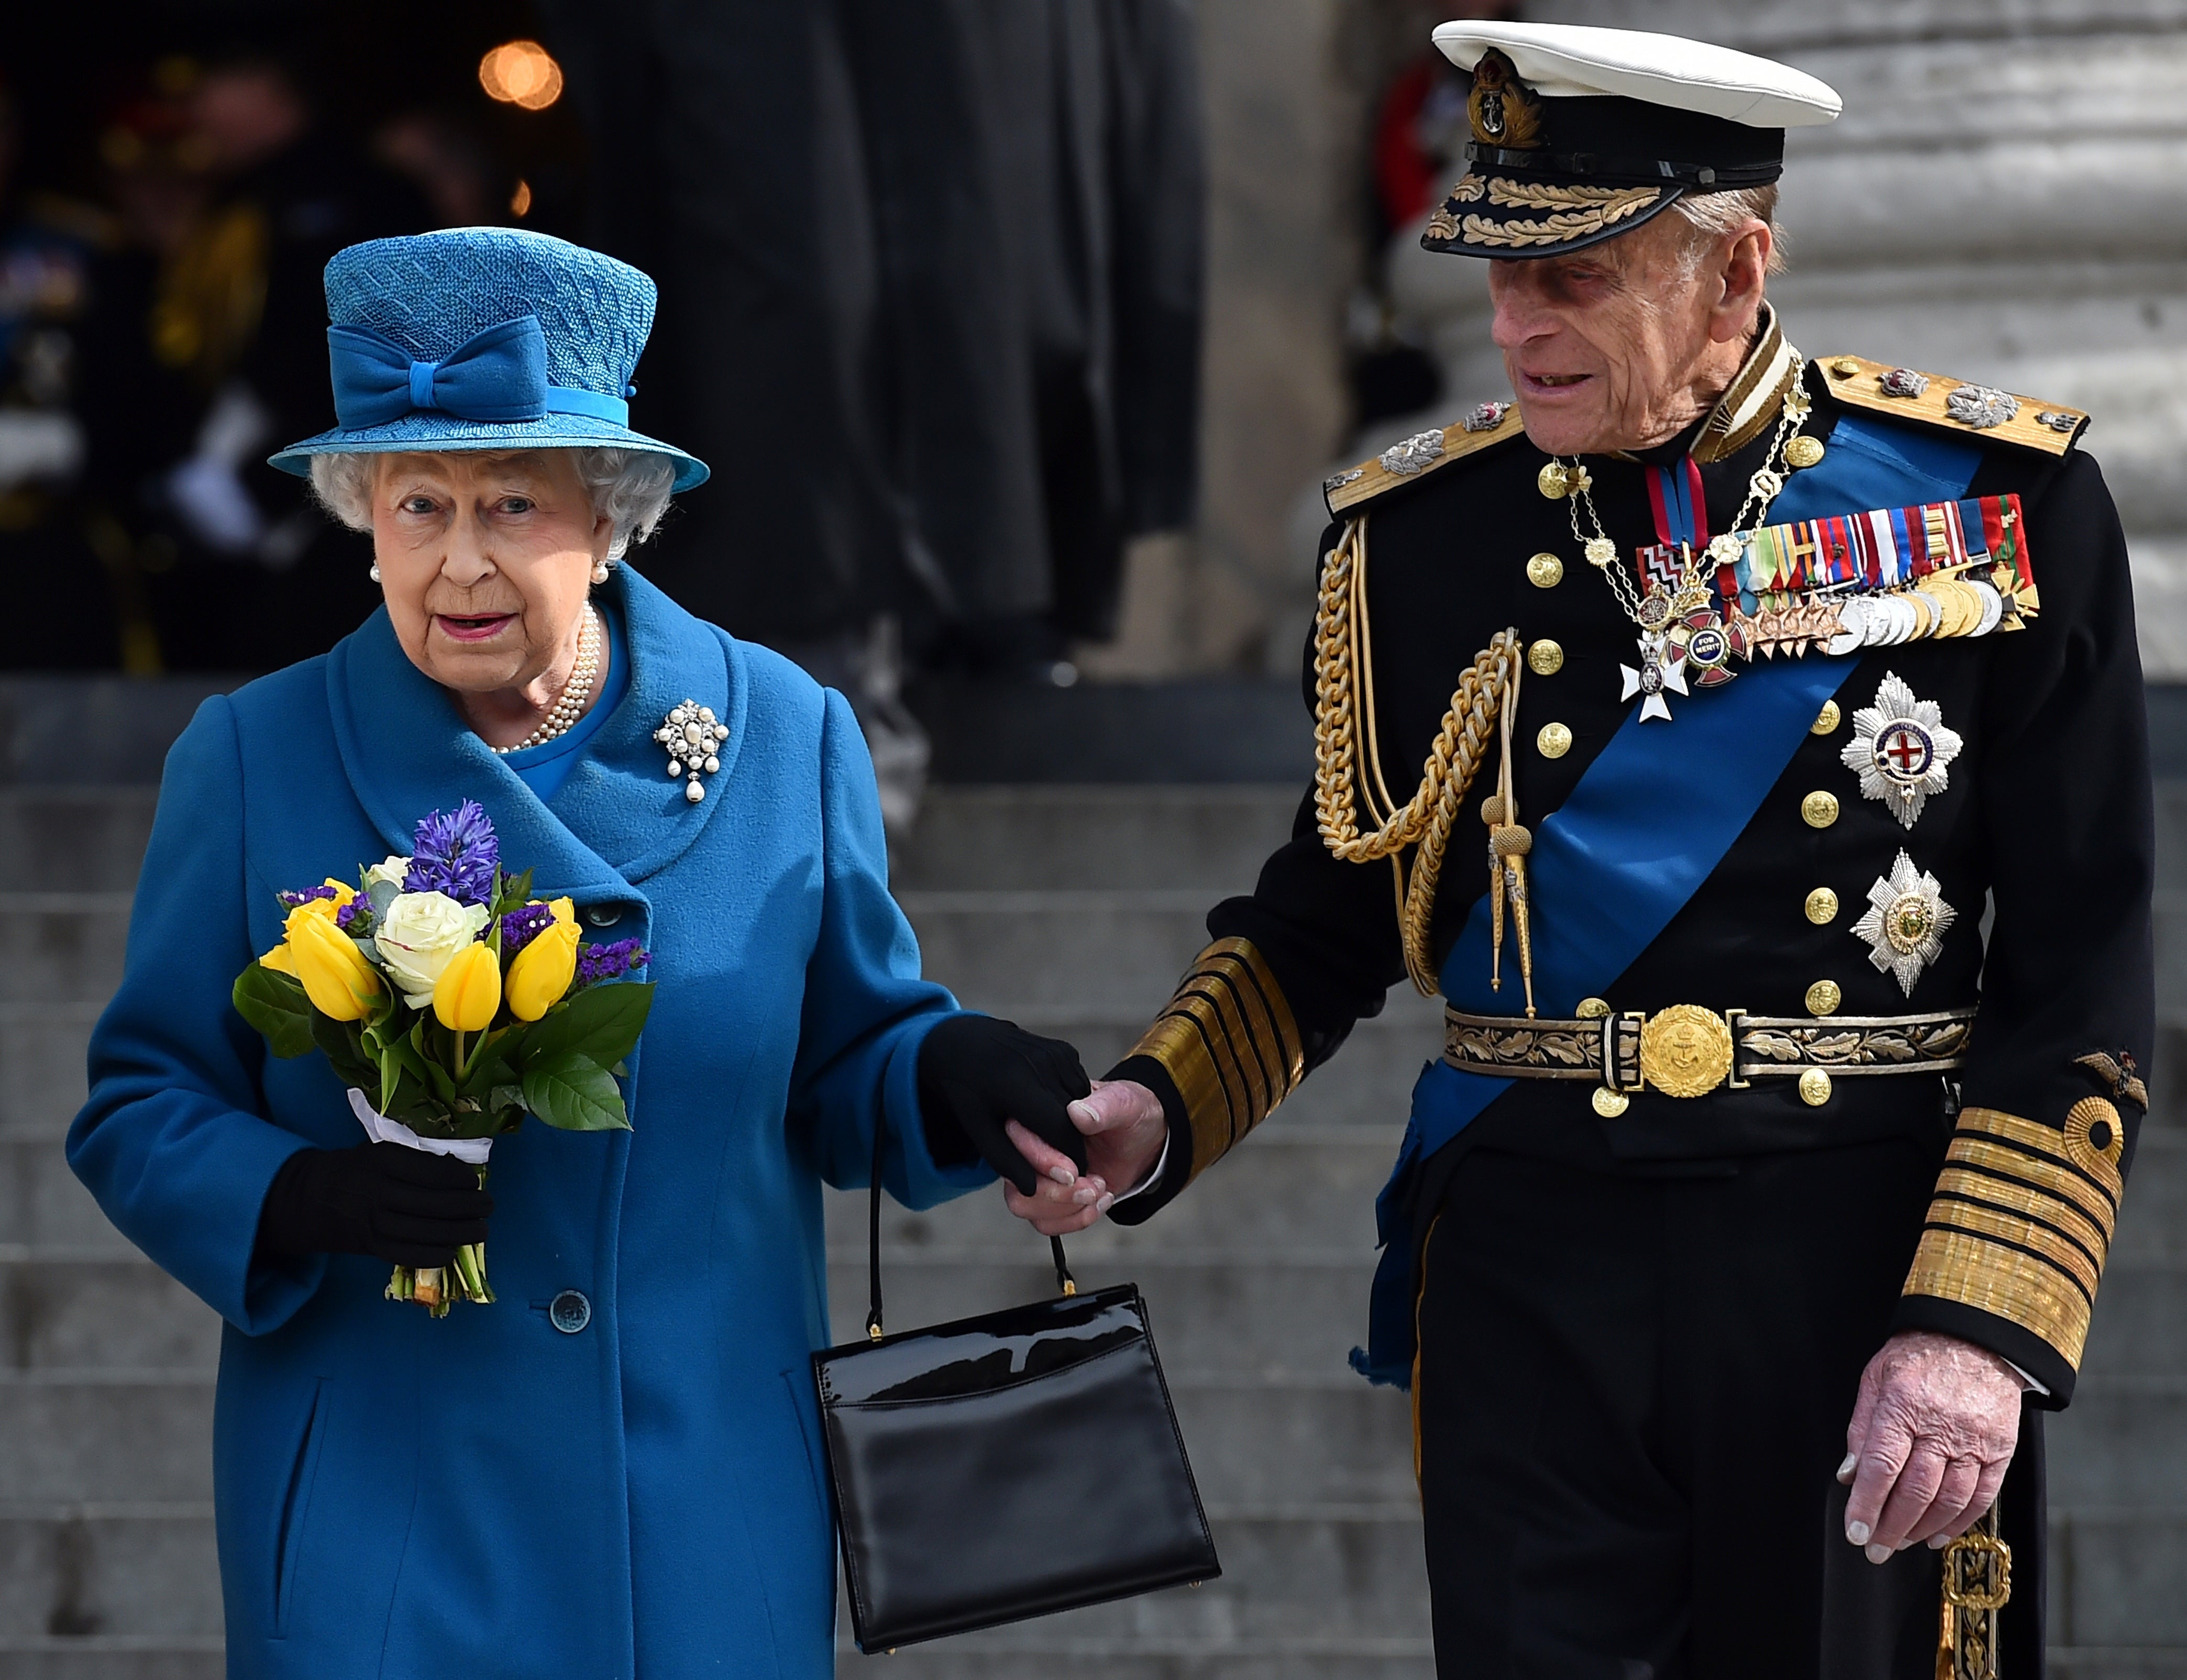 The Queen and her husband of 73 years, Prince Philip